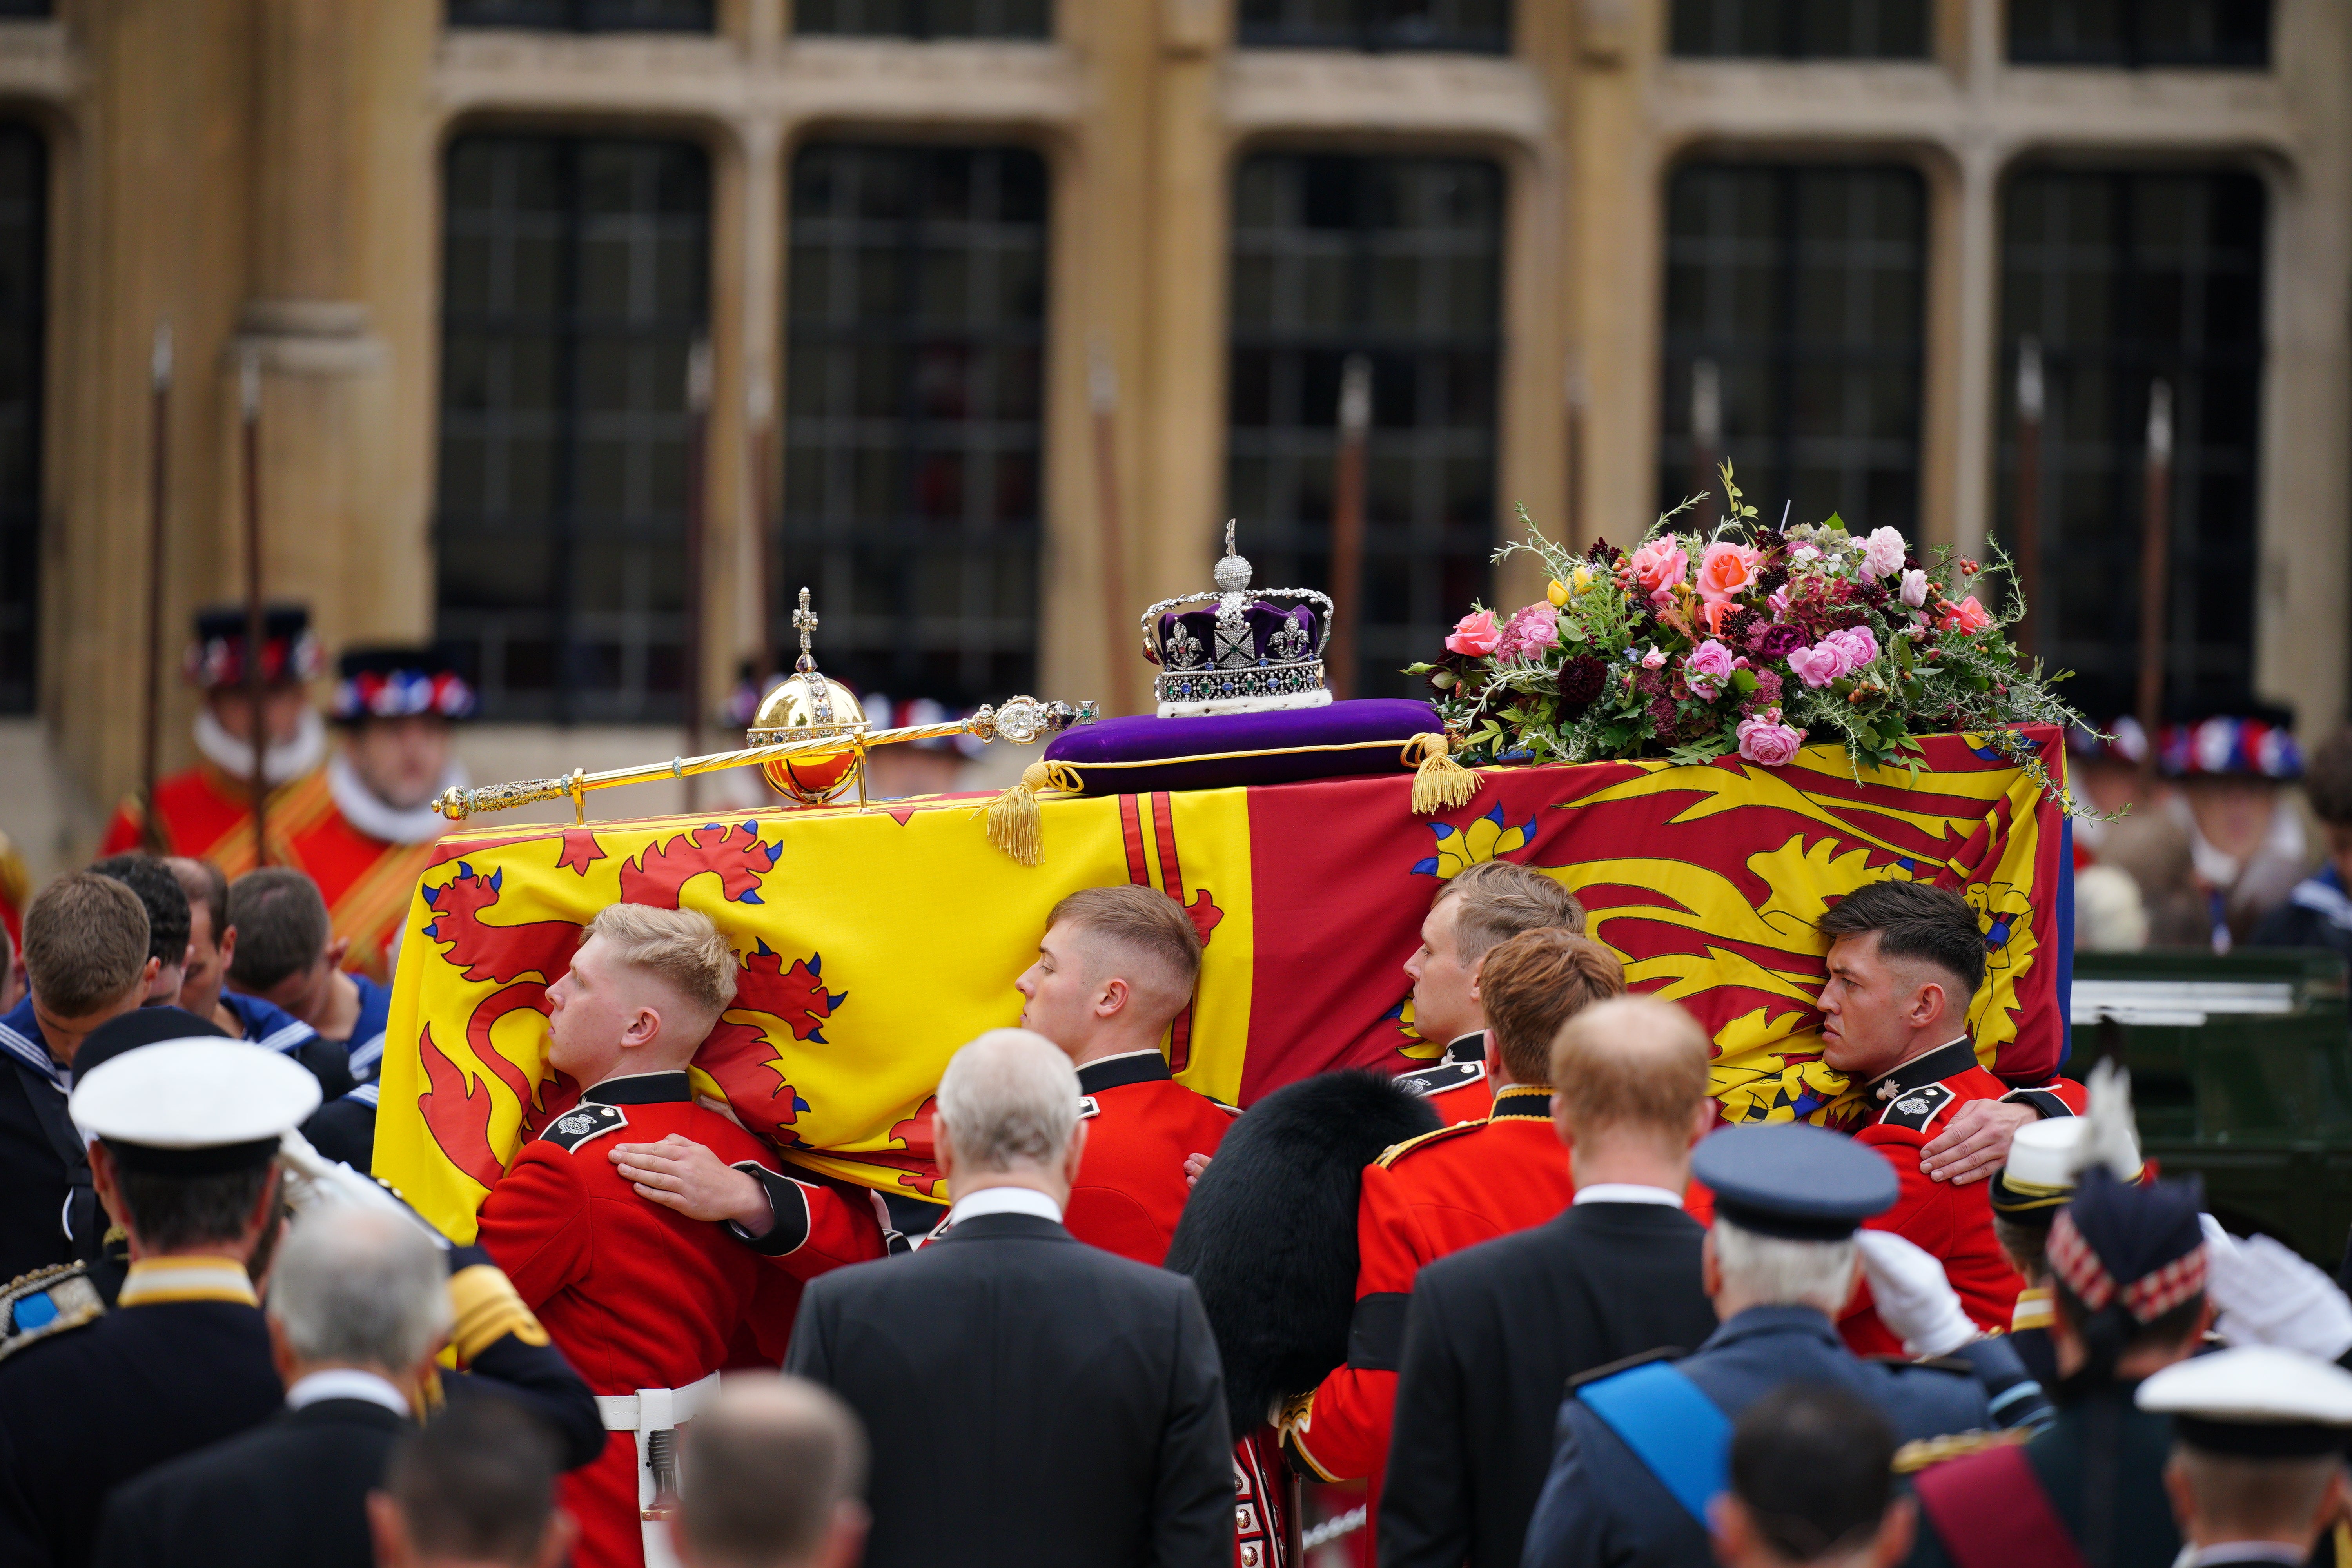 The Queen’s coffin is carried at the state funeral at Westminster Abbey, London (Pete Byrne/PA)